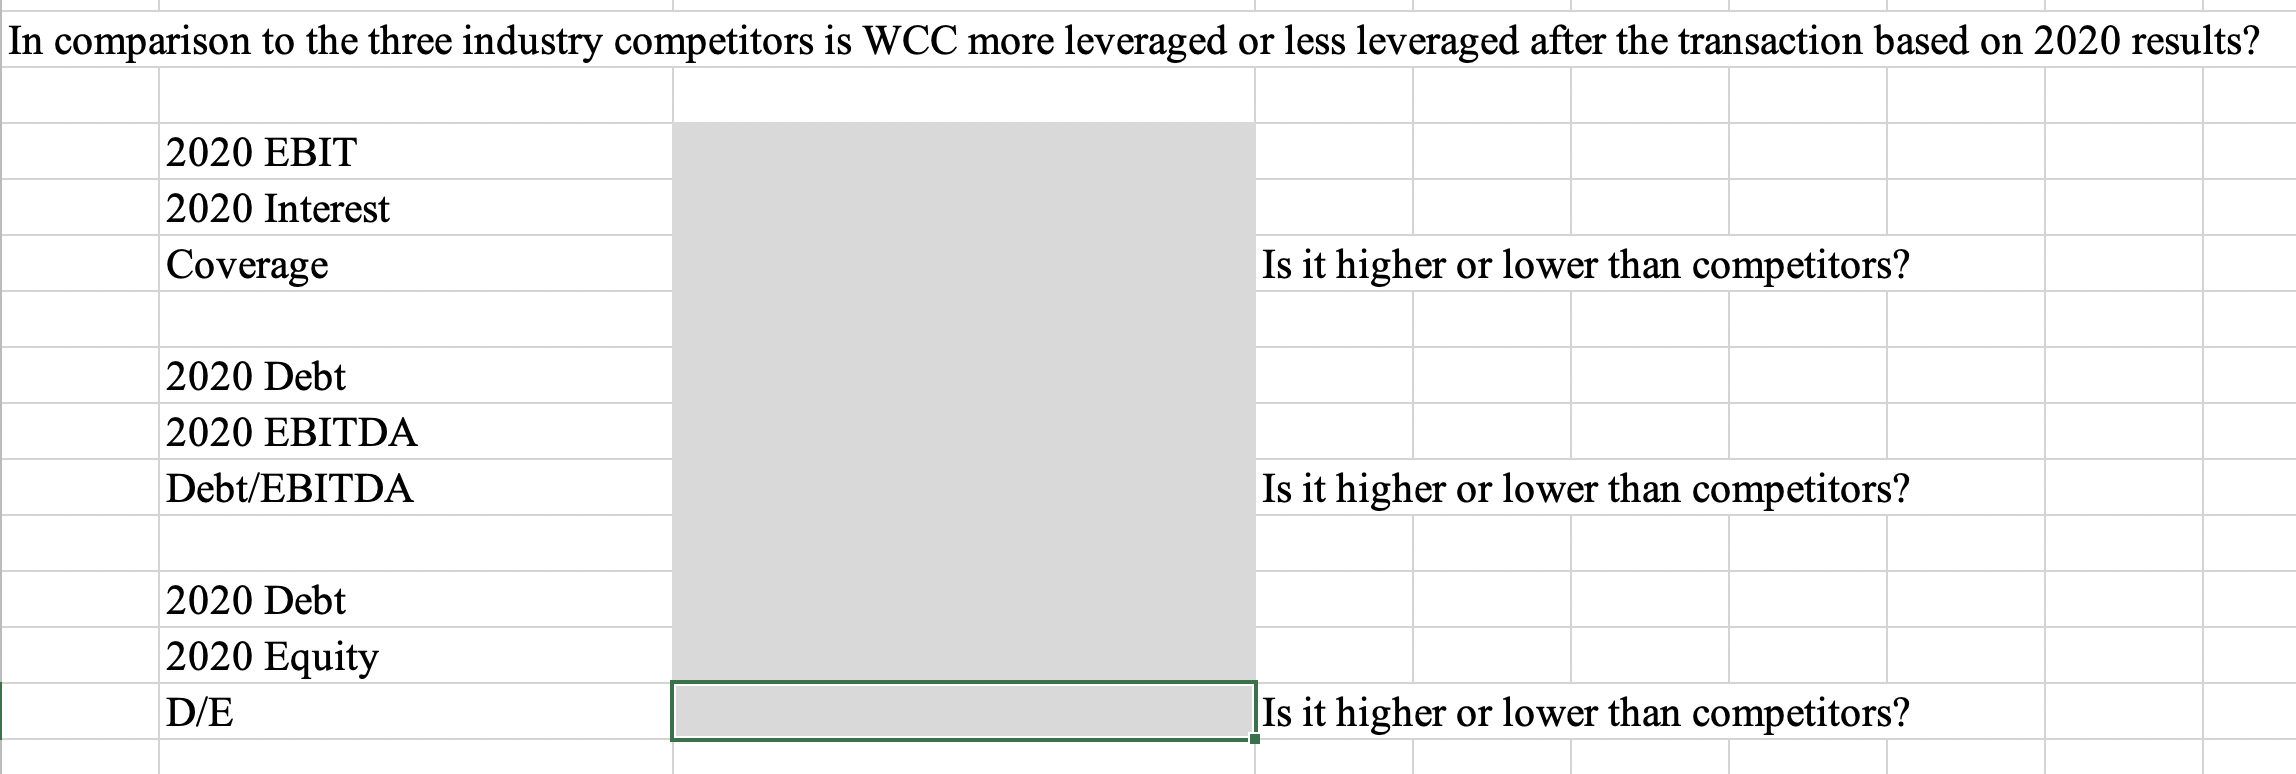 In comparison to the three industry competitors is WCC more leveraged or less leveraged after the transaction based on 2020 r